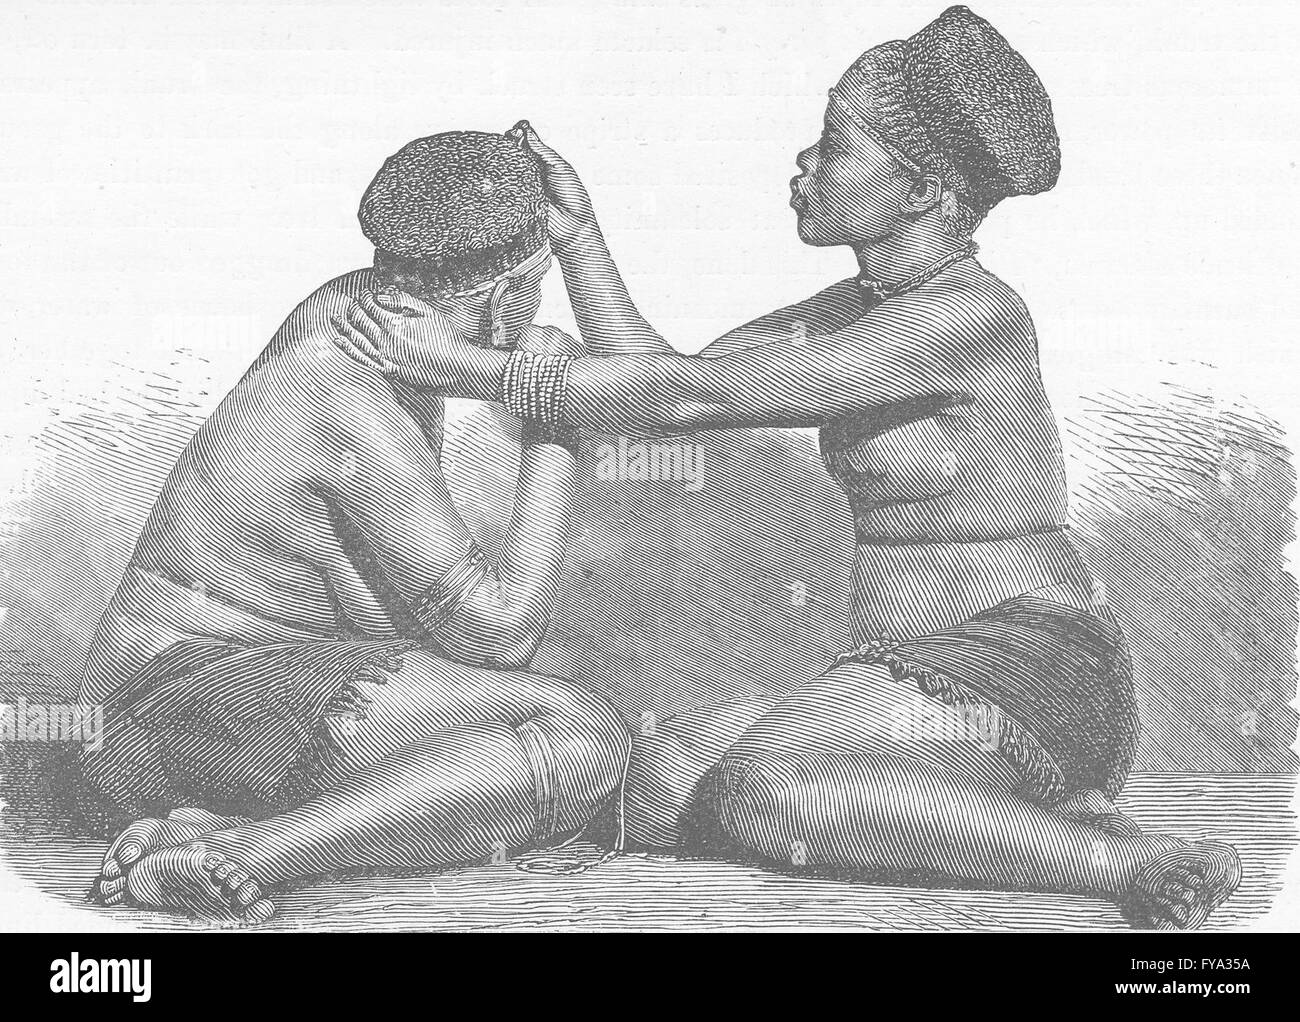 SOUTH AFRICA: Zulu women at their Toilette, antique print 1890 Stock Photo